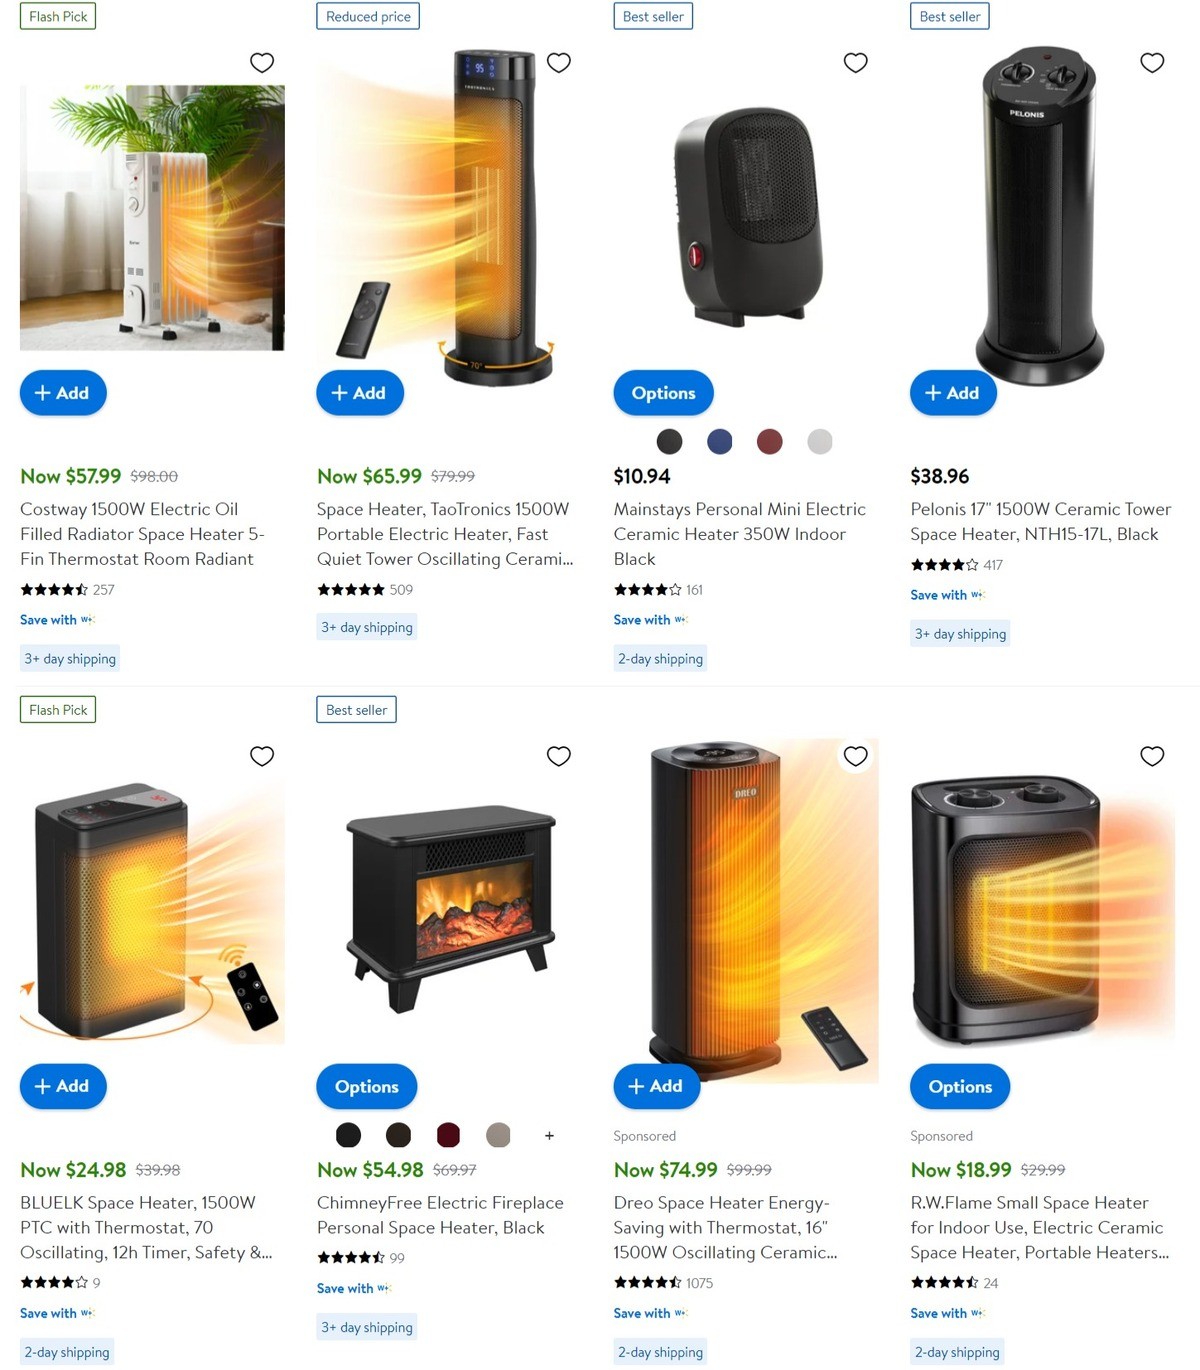 Walmart Heaters in Heating Weekly Ad from December 20